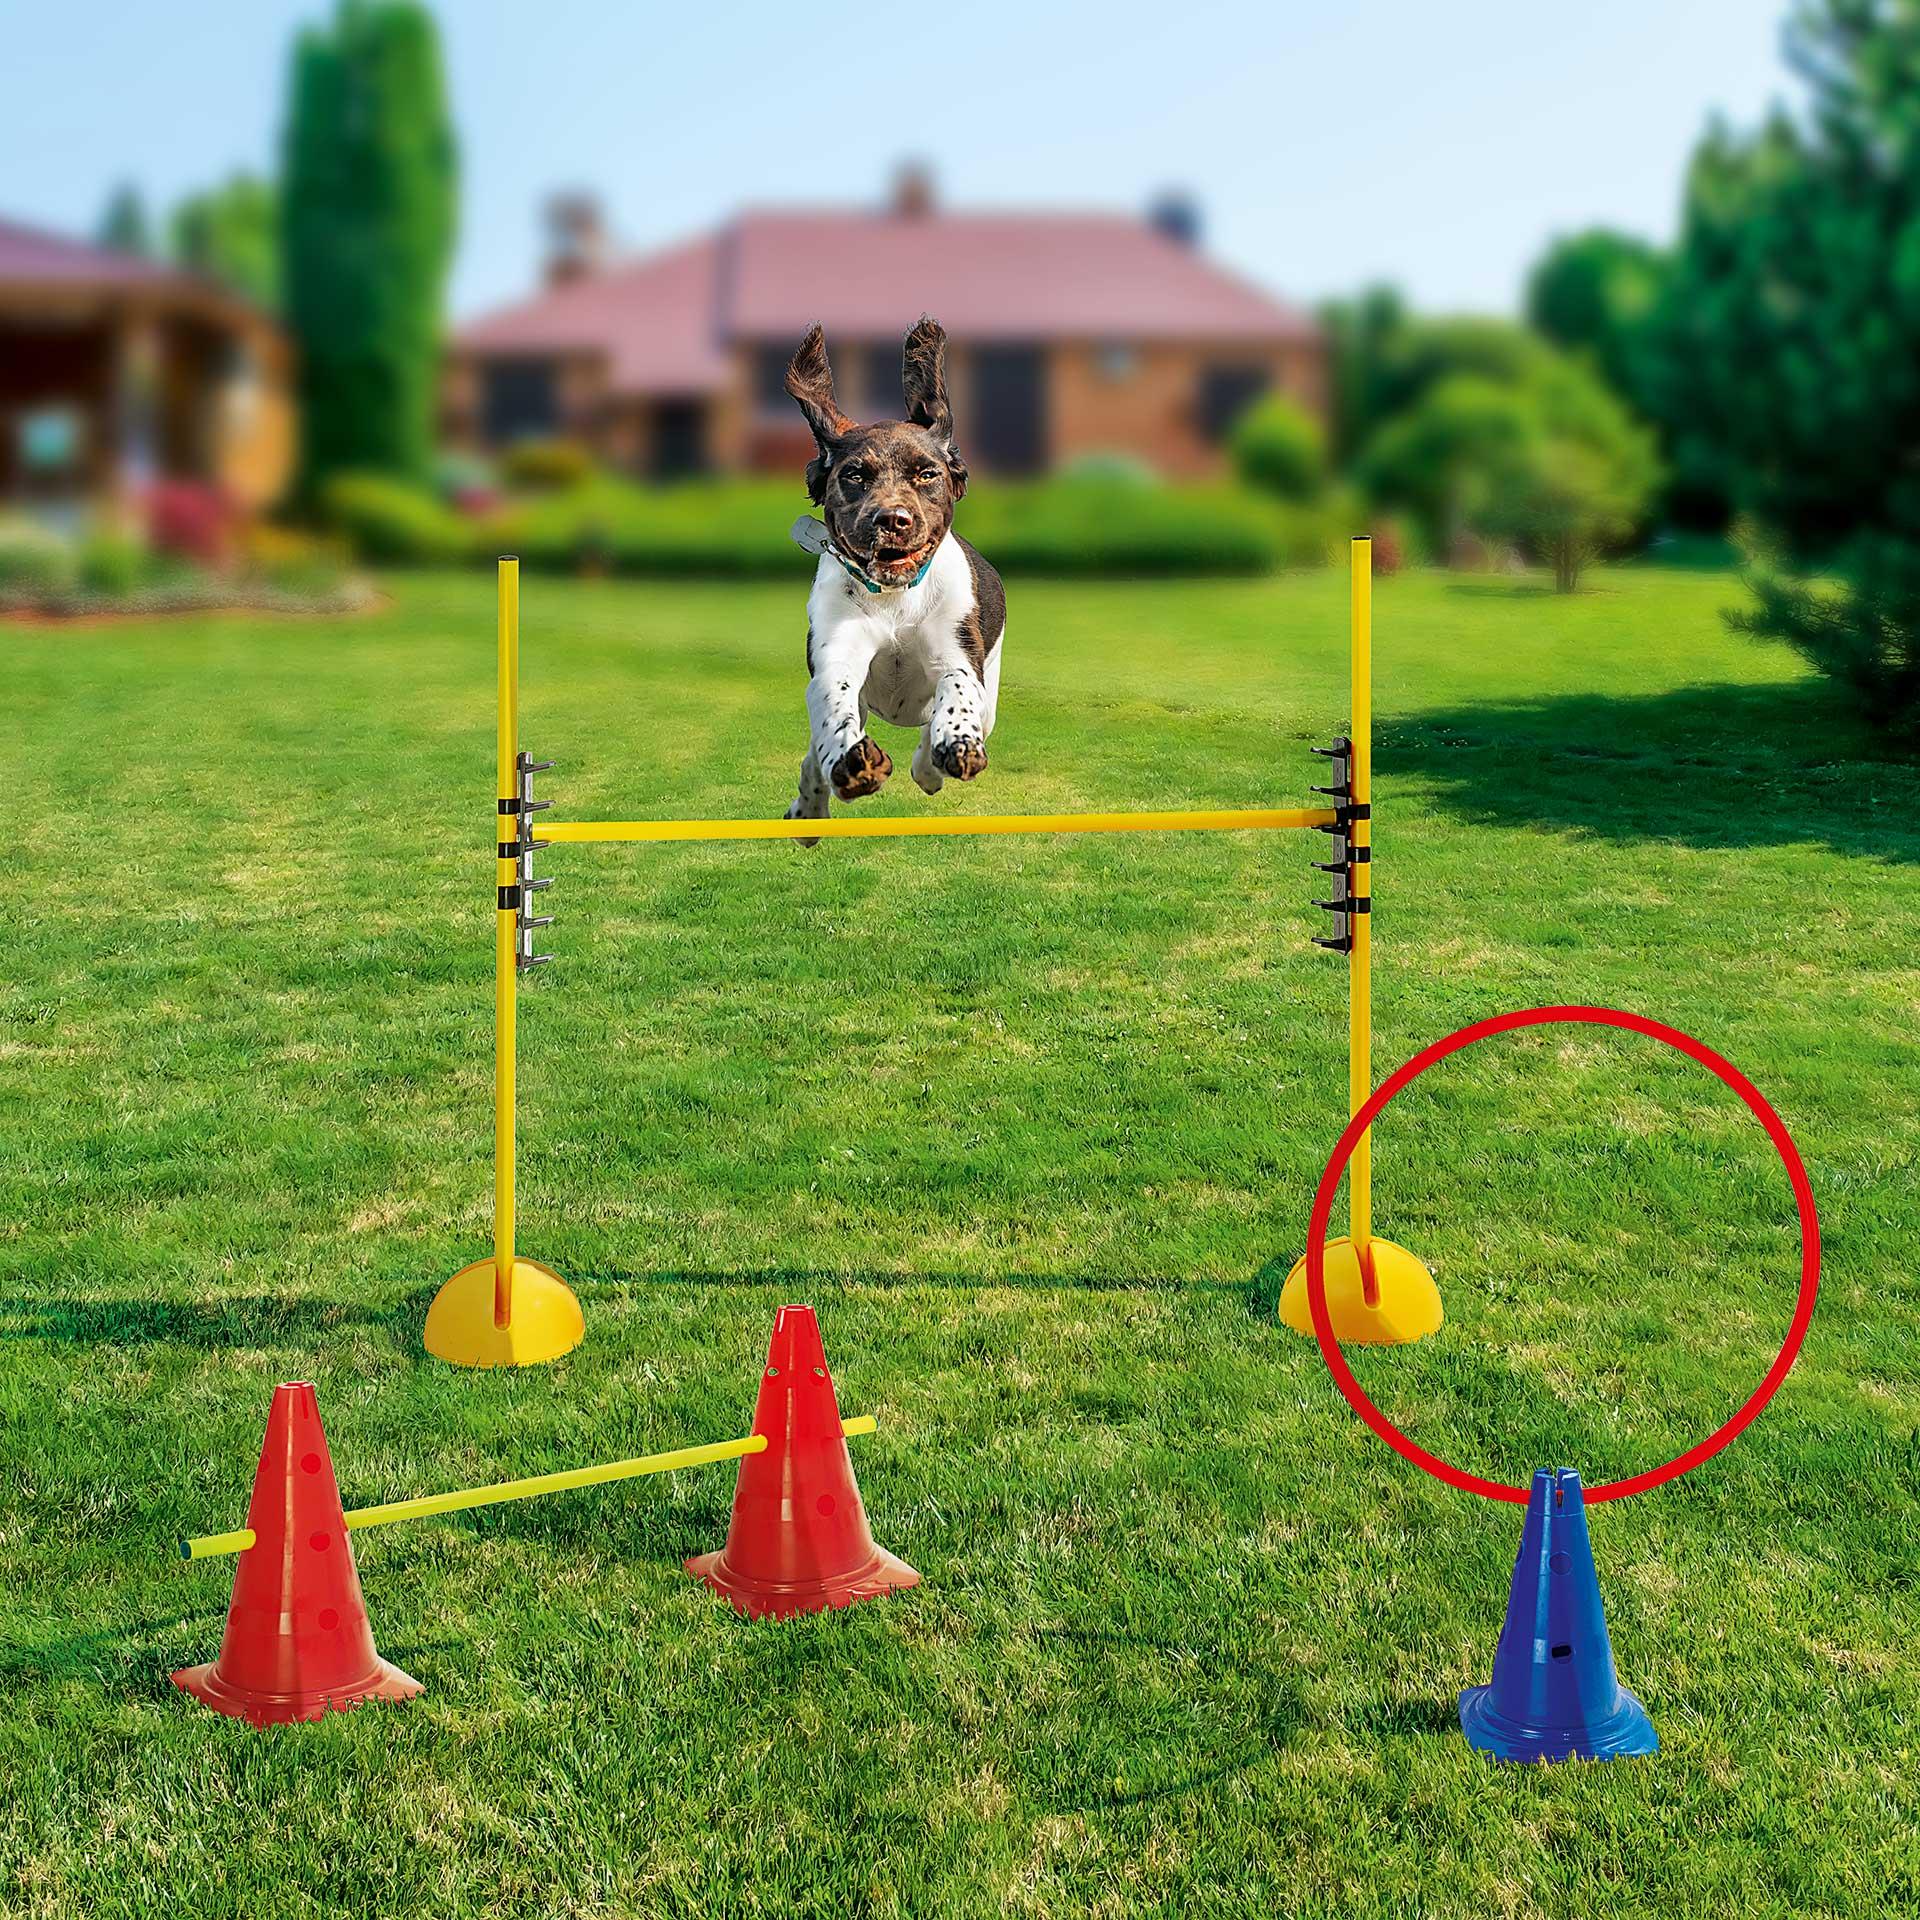 Agility Hundeparcours Ausstattung 14tlg.